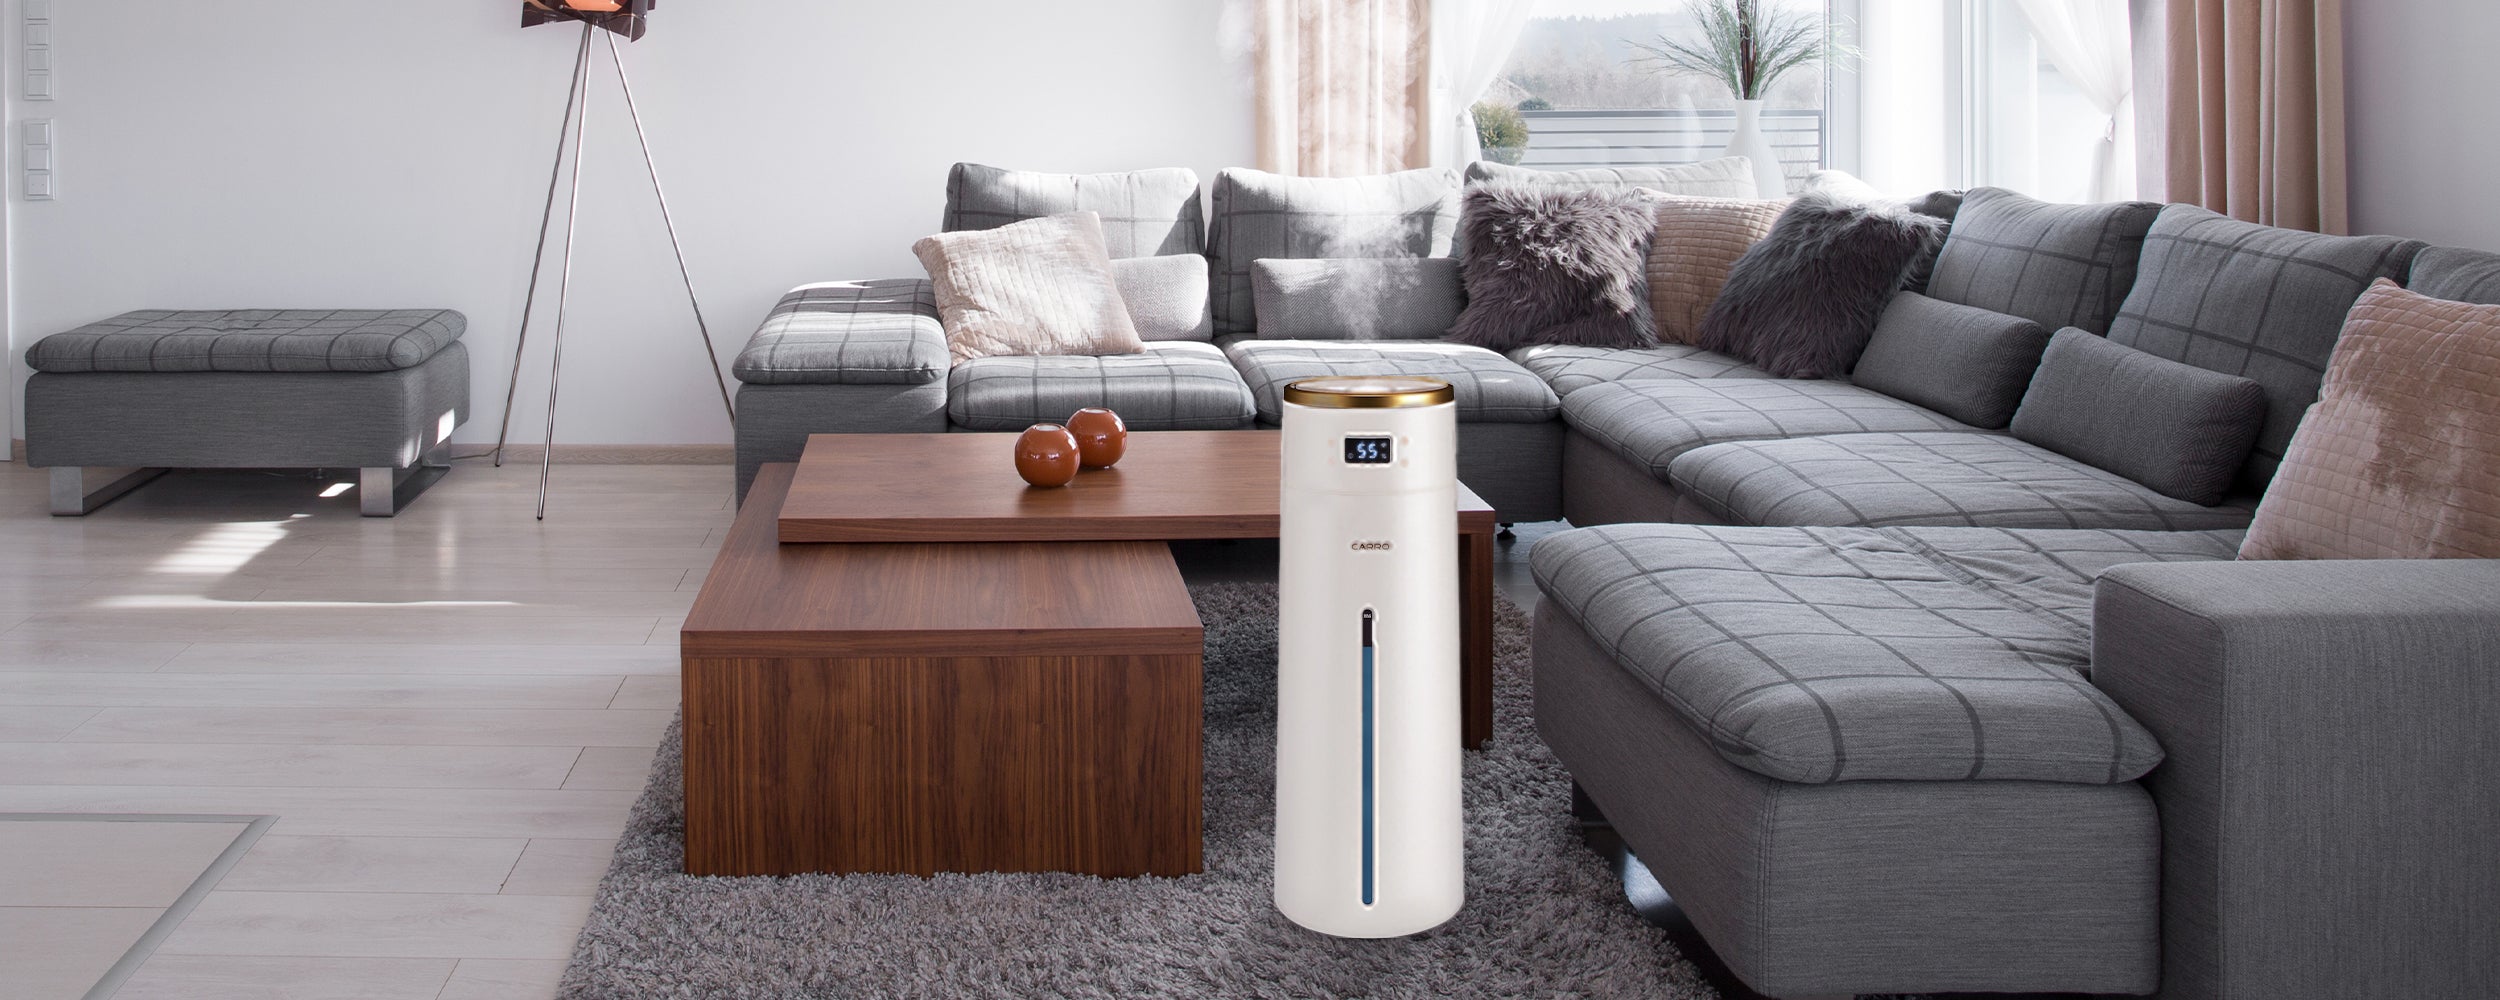 Where To Put a Humidifier (Living Room, Bedroom)